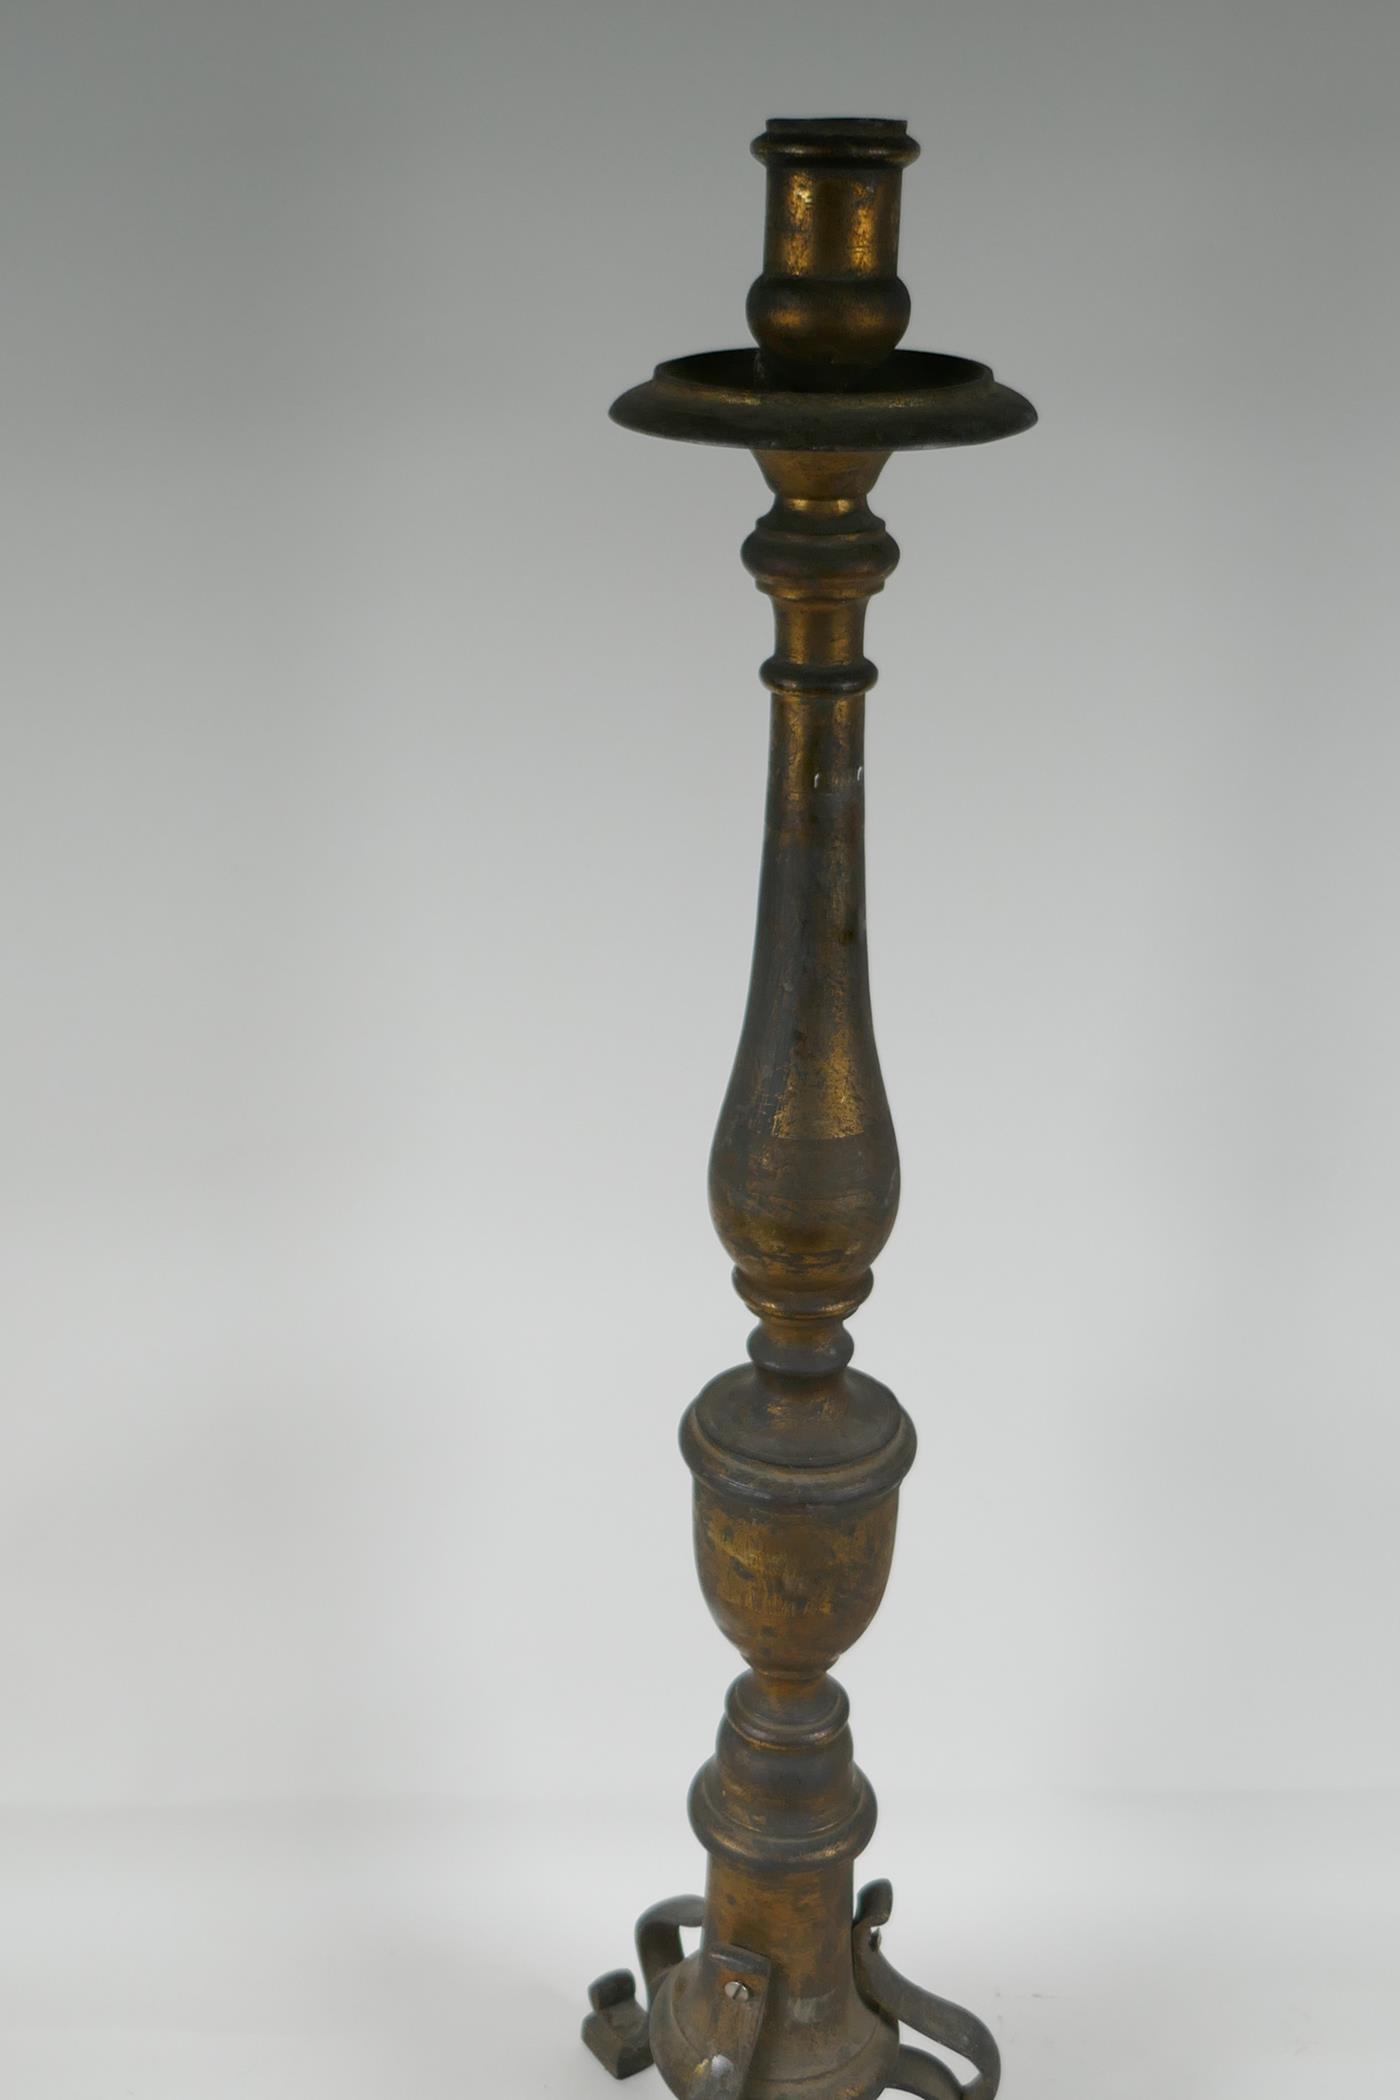 A turned bronze candlestick on a tripod base, 28" high - Image 3 of 3